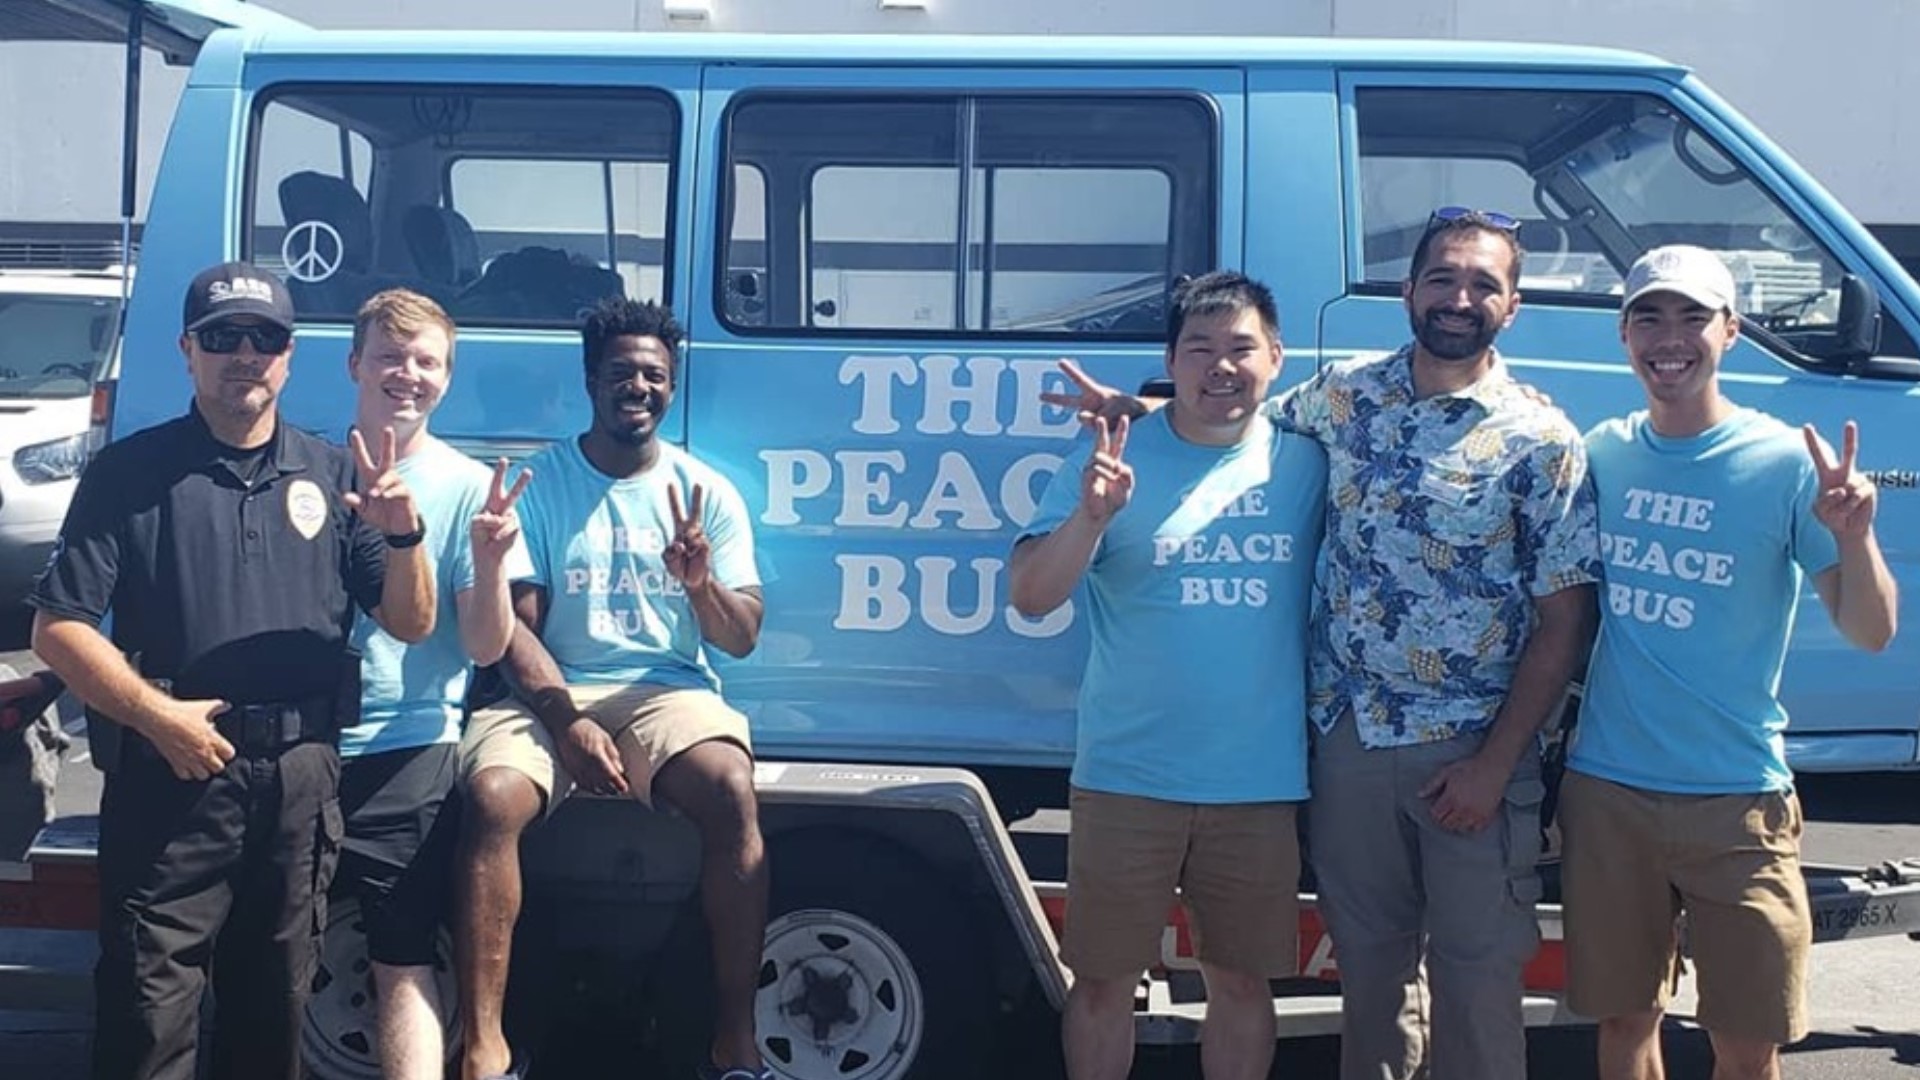 Kwabi Amoah-Forson spreads his message of Peace by talking about it, documenting interviews with local leaders and everyday people on the Real Peace Podcast.